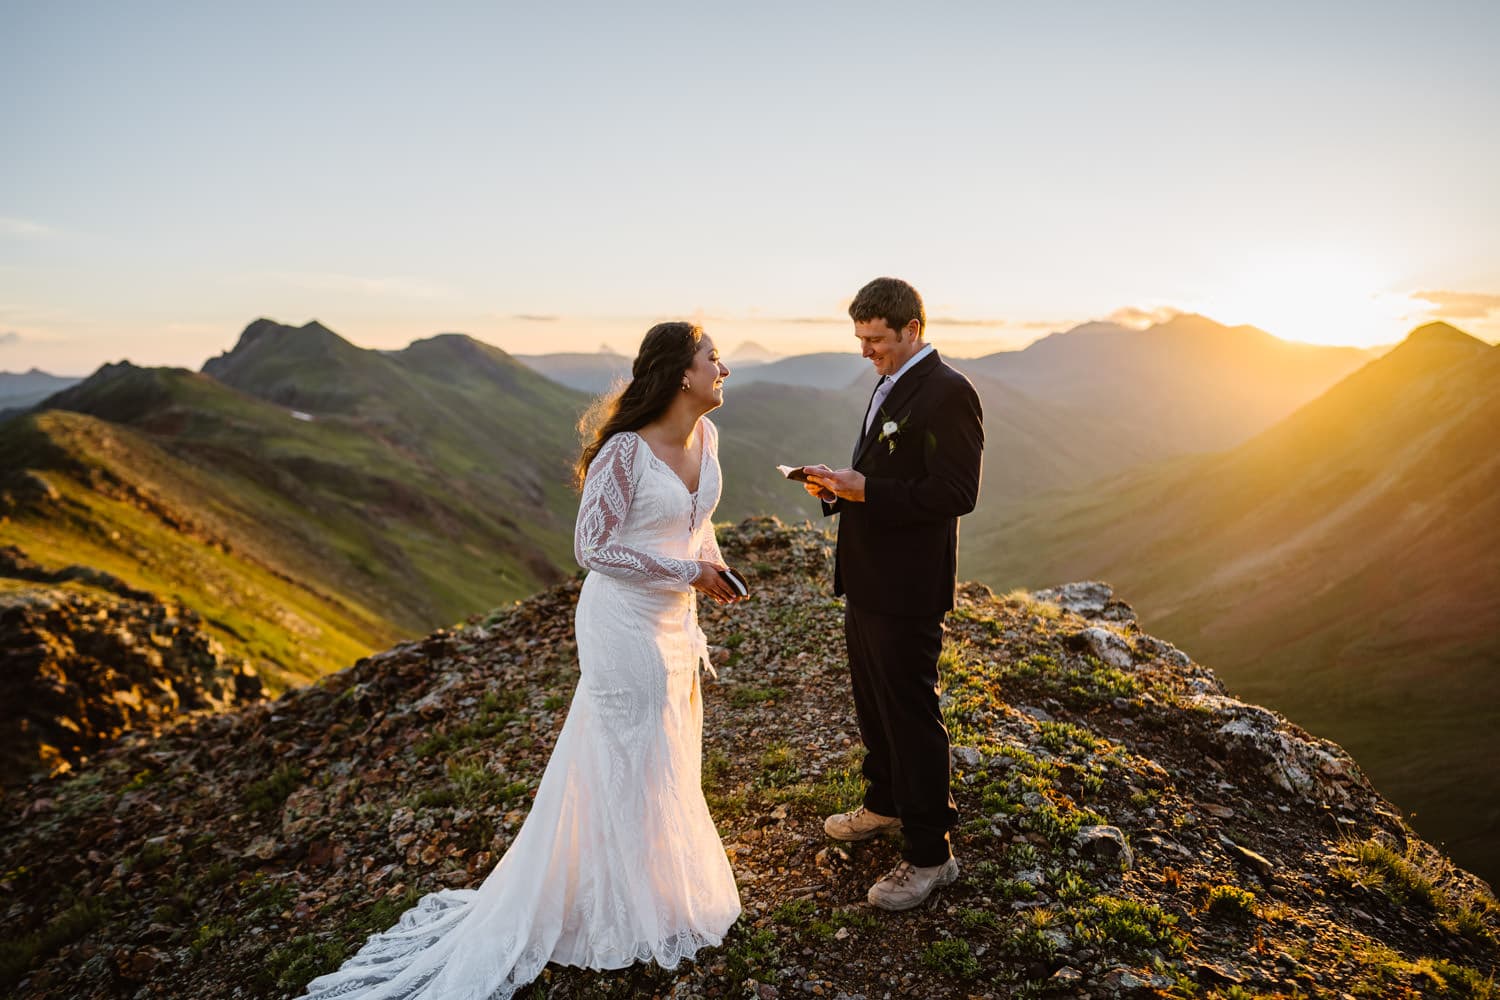 A bride laughing during her elopement ceremony at sunrise.